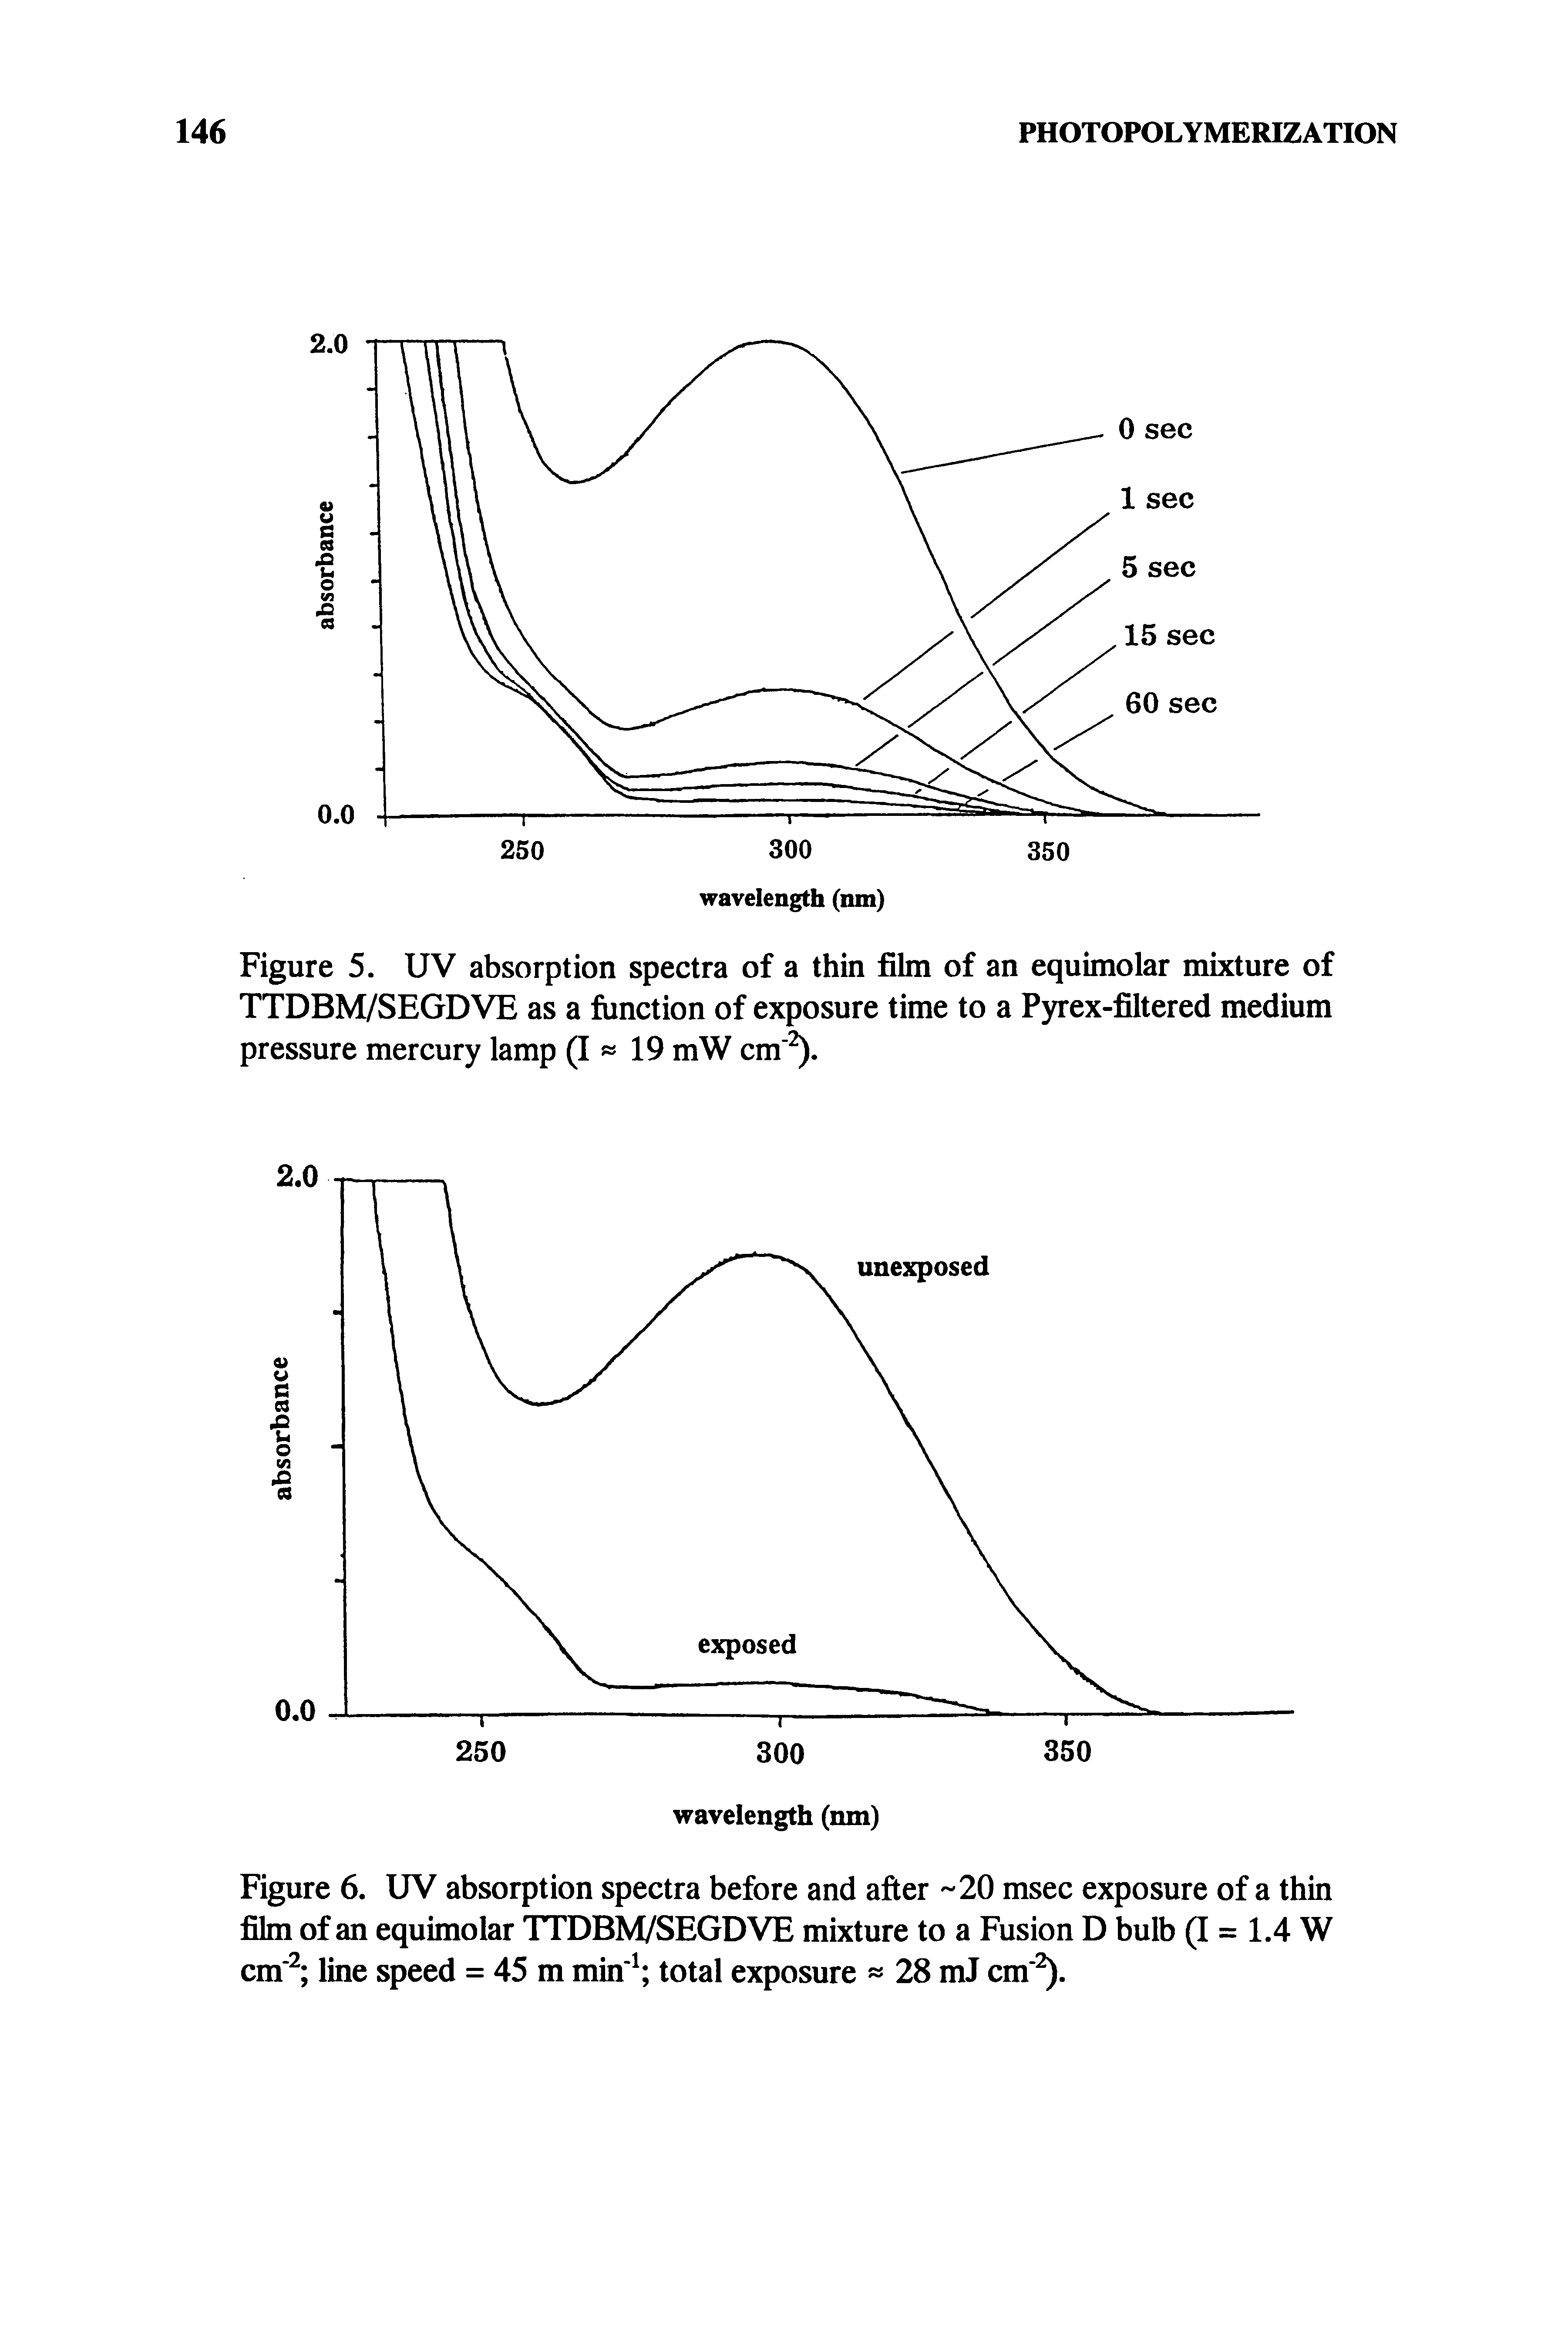 Figure 6. UV absorption spectra before and after 20 msec exposure of a thin film of an equimolar TTDBM/SEGDVE mixture to a Fusion D bulb (I = 1.4 W cm"2 line speed = 45 m min"1 total exposure 28 mJ cm"2).